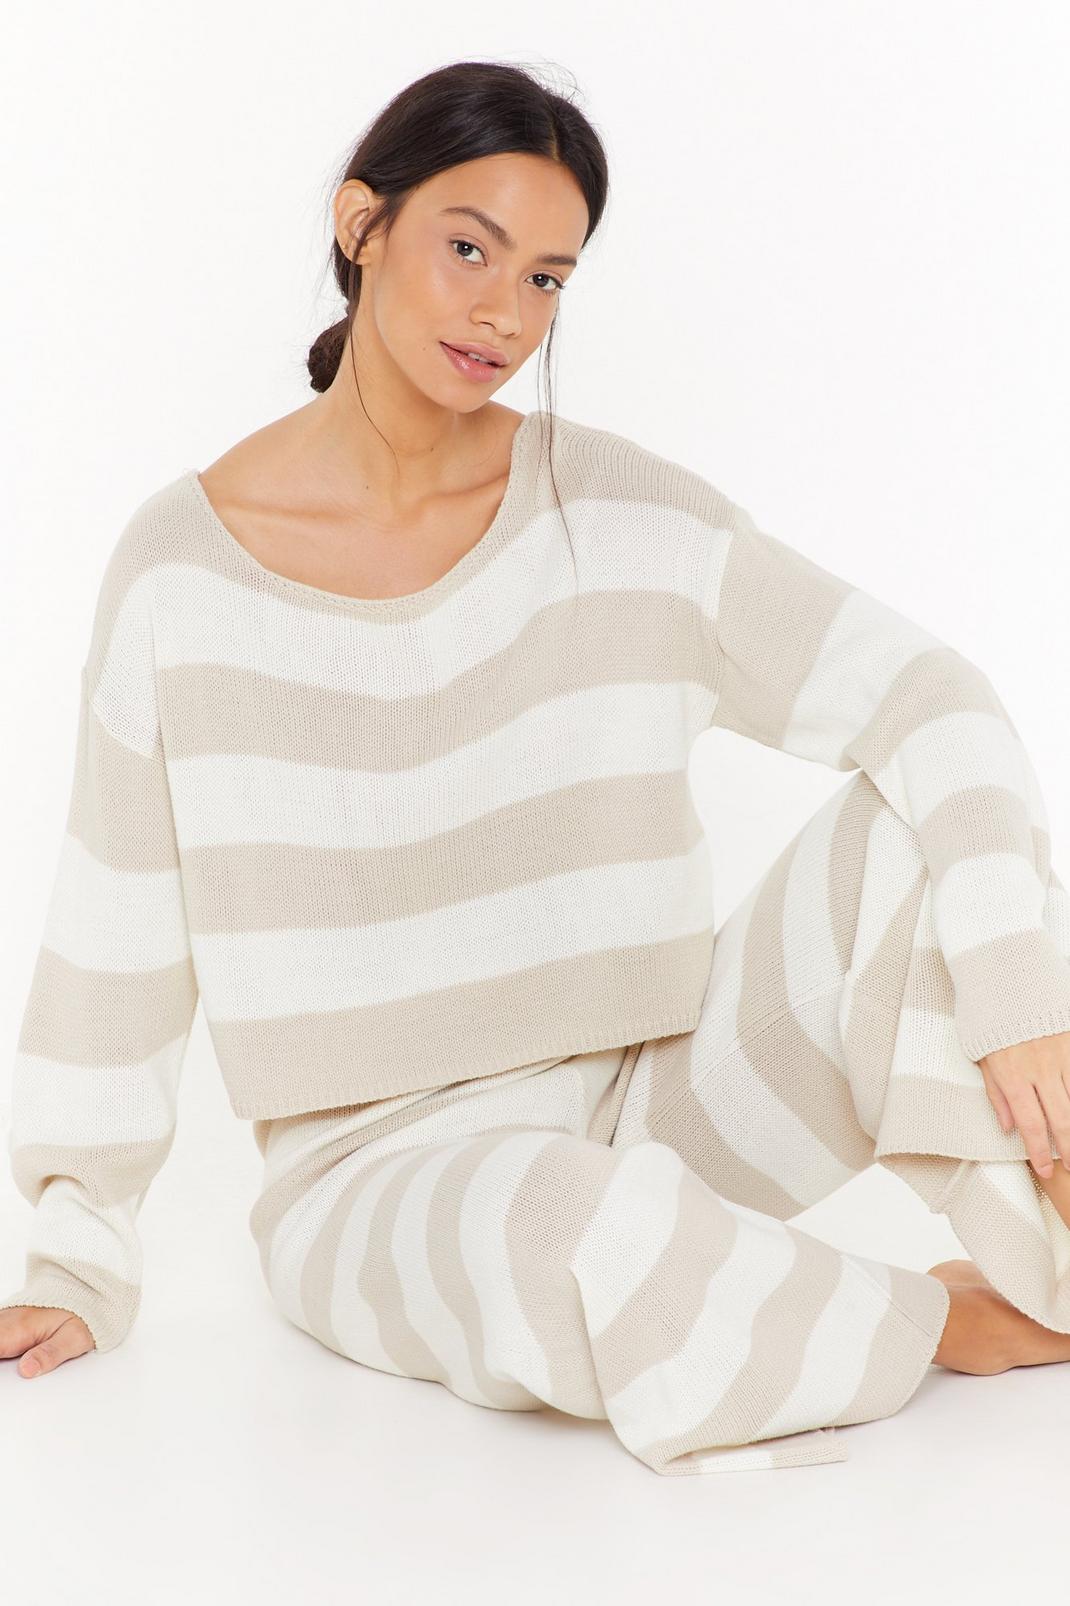 Escape Artist Stripe Sweater and Pants Lounge Set image number 1